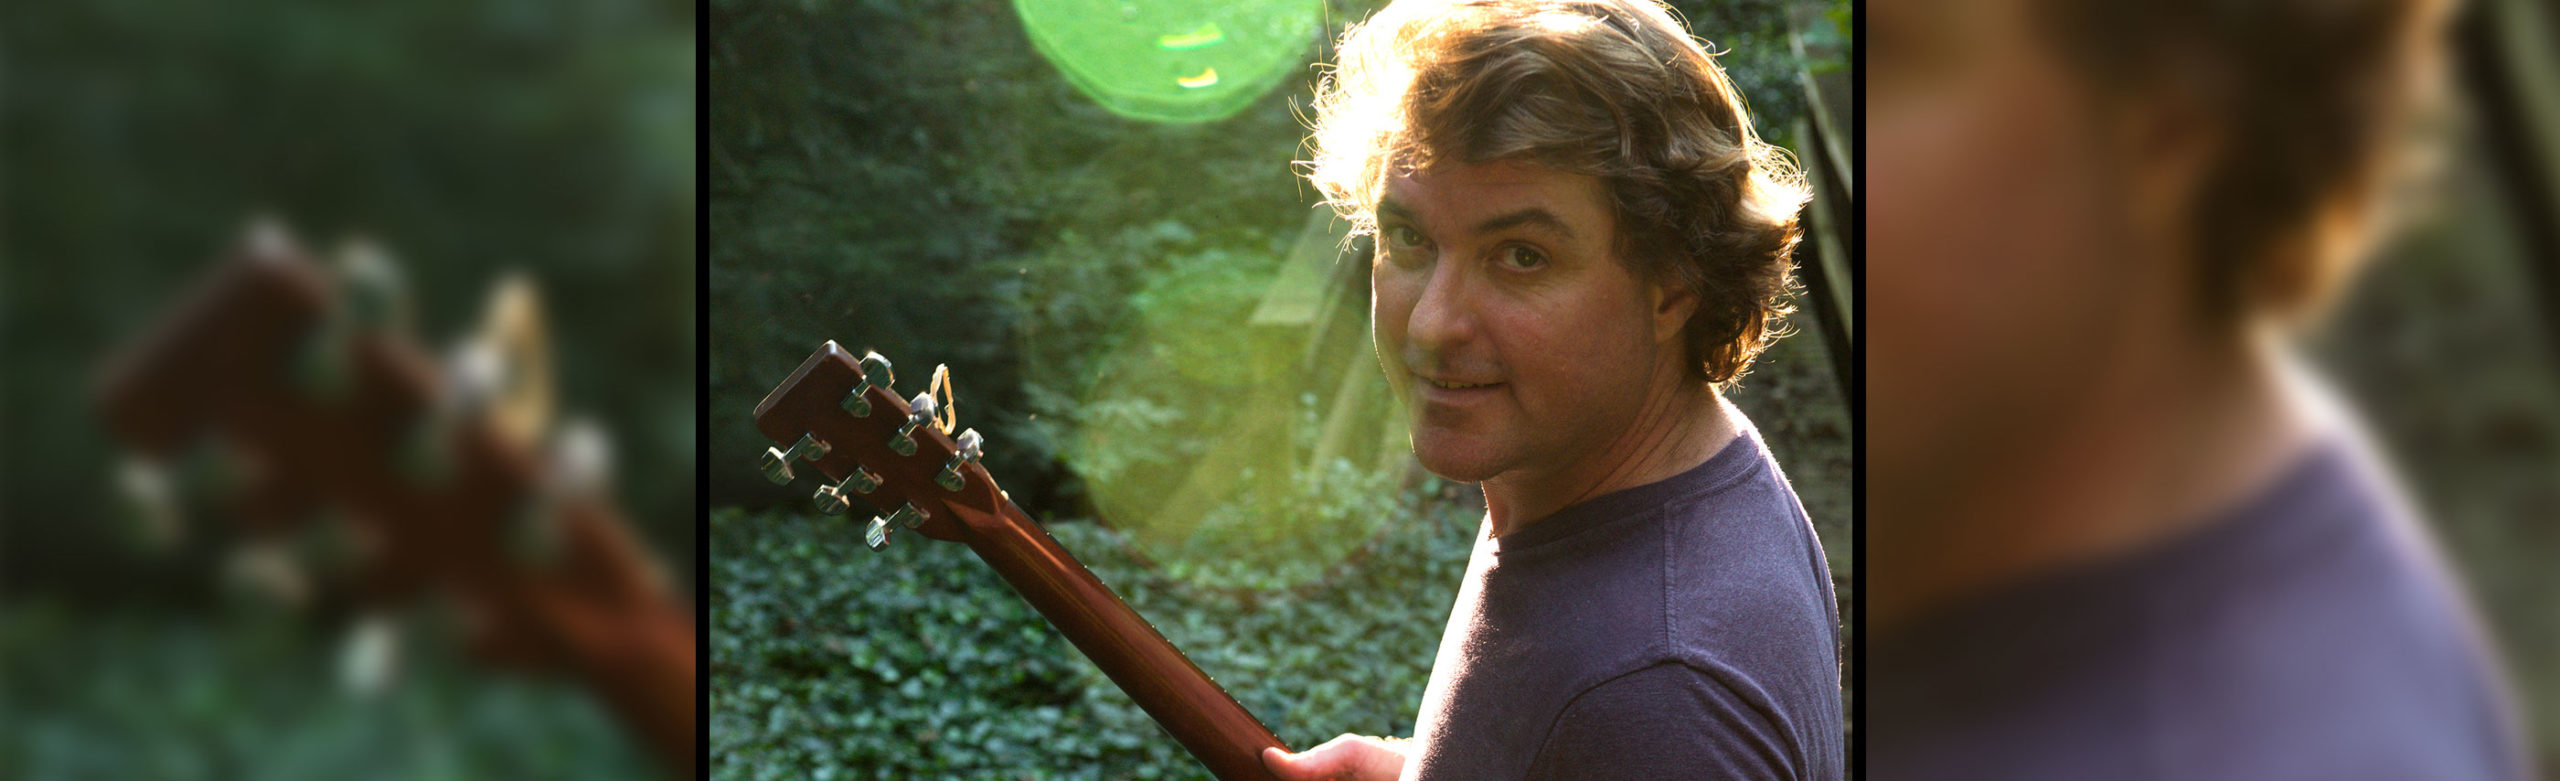 One Man Band: An Evening with Keller Williams Announced in Missoula Image